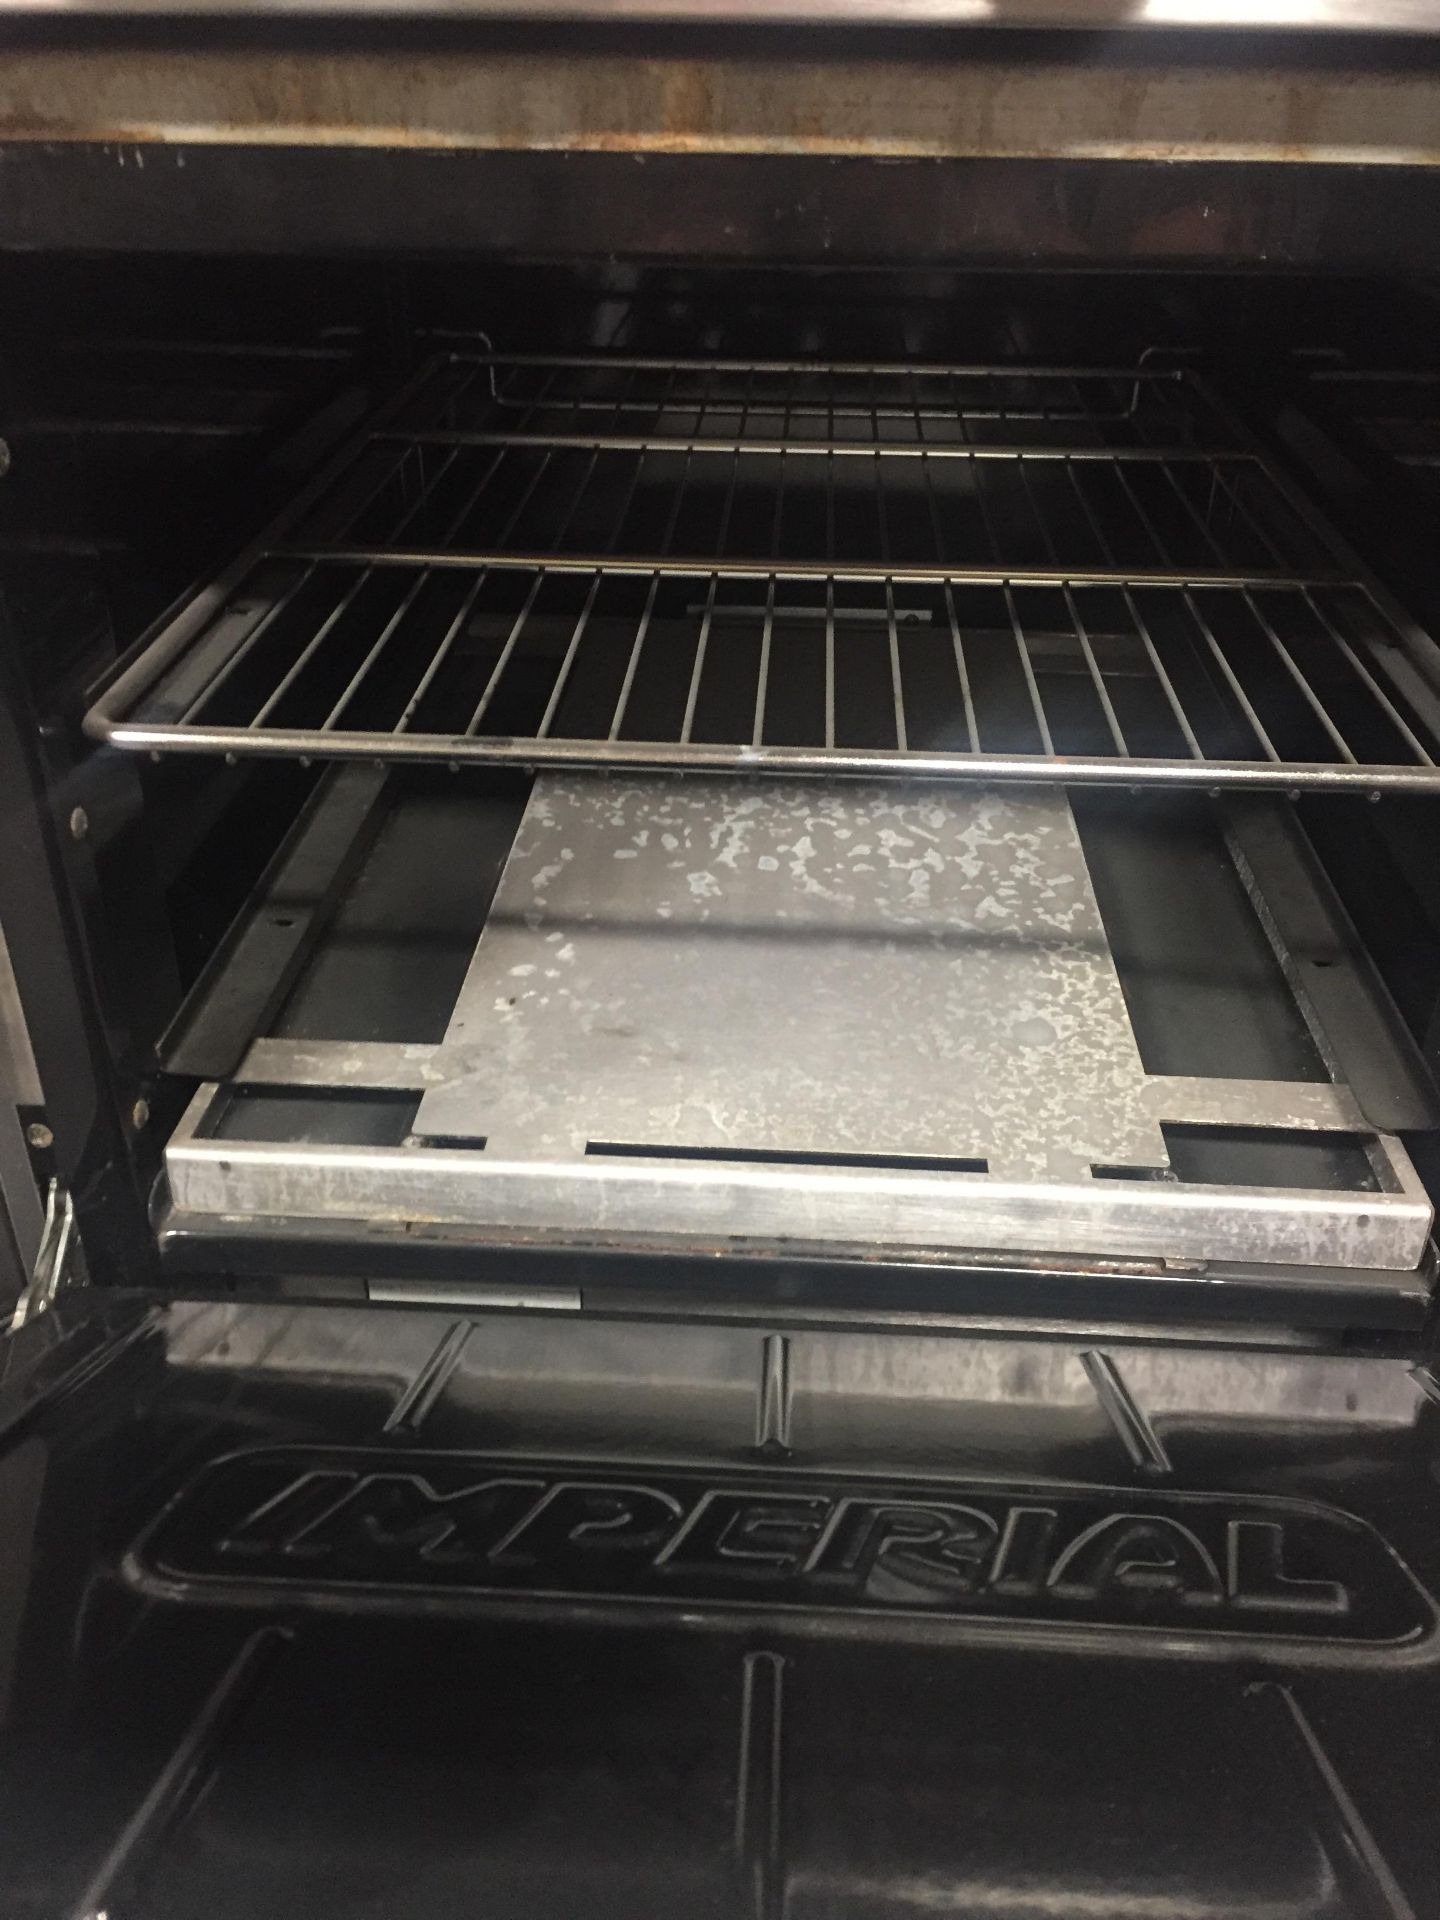 Imperial IR-4-E Electric 4 Burner Range, c/w oven, 208/1 - Image 2 of 3